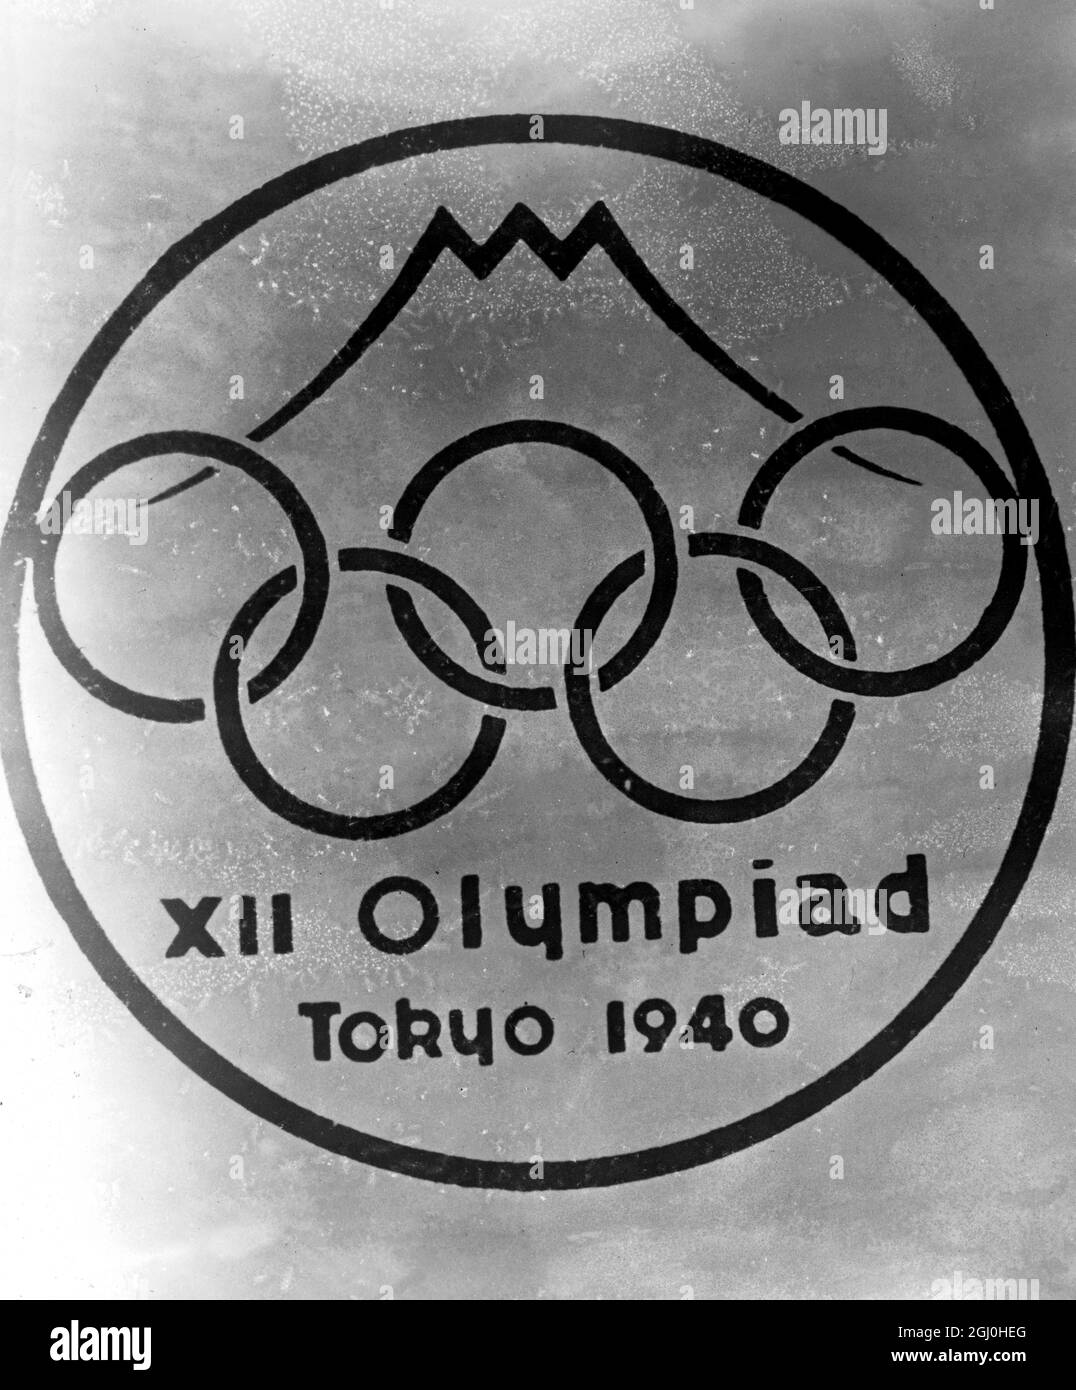 The Olympics that never was. Despite her preoccupation with the hostilities in China, Japan is pushing ahead with preparations for the 1940 Olympic Games which are to take place in Tokyo. The design for the Tokyo Olympic badge has now been selected and all kinds of propaganda material are being produced - Photo shows the prize-winning design for the Tokyo Olympic Games badge. - 17th December 1937 - ©TopFoto Stock Photo